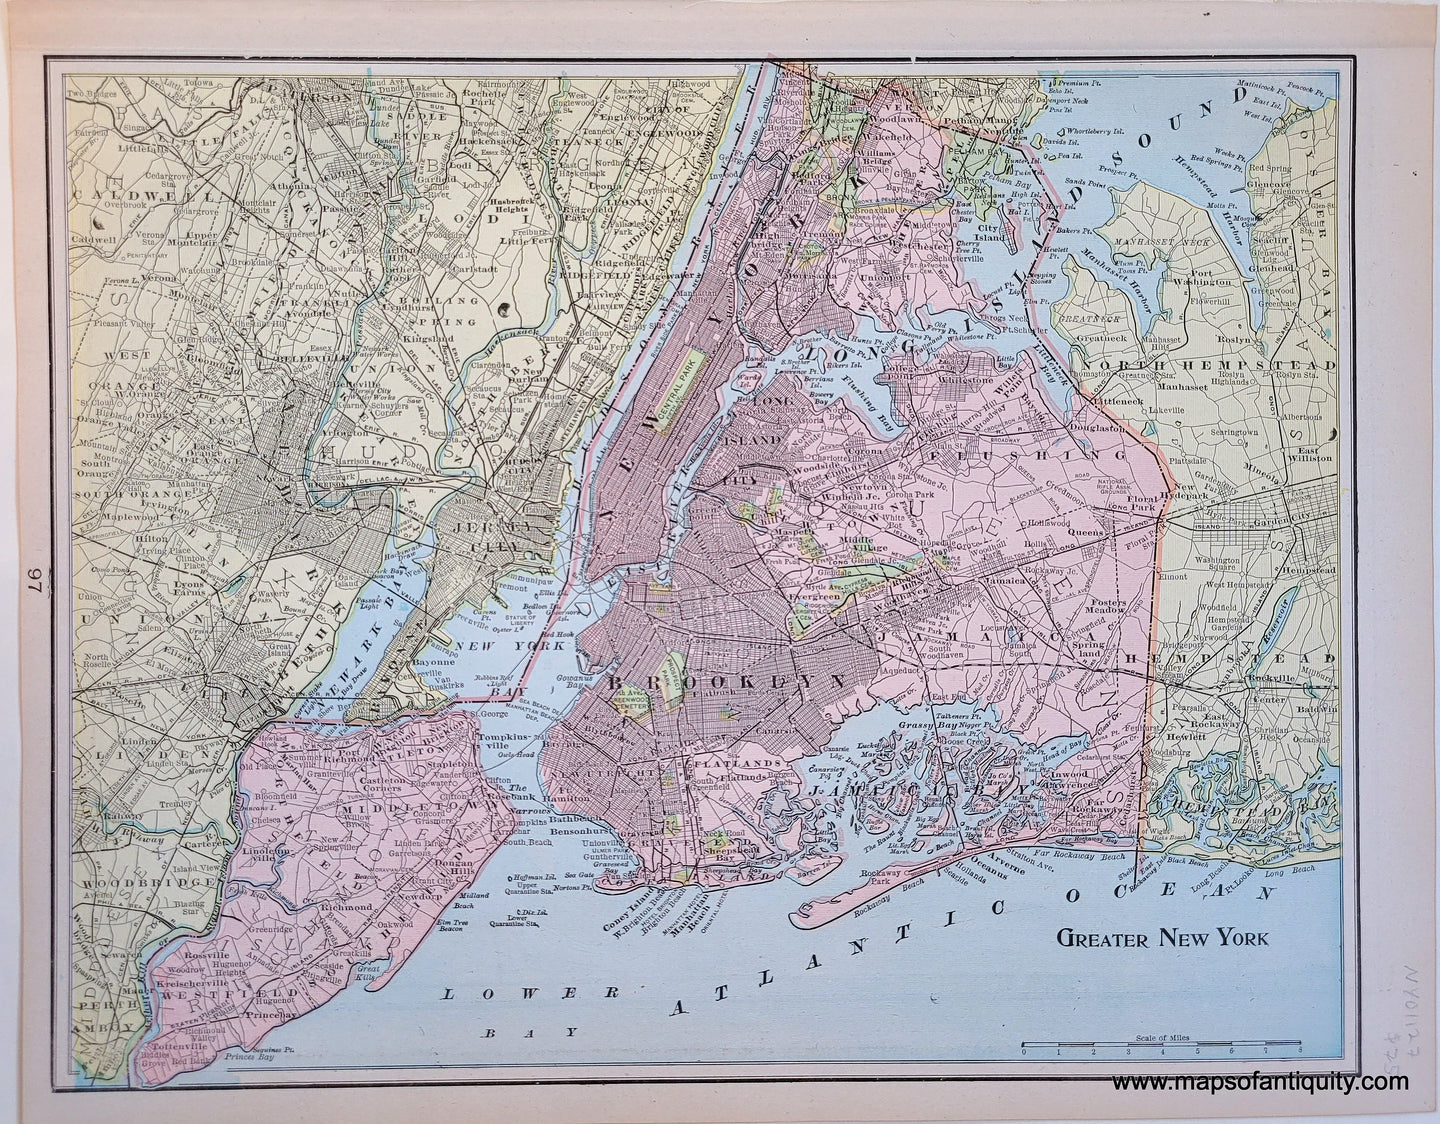 Antique-Printed-Color-Map-Manhattan-Brooklyn-Greater-New-York-North-America-Northeast-1900-Cram-Maps-Of-Antiquity